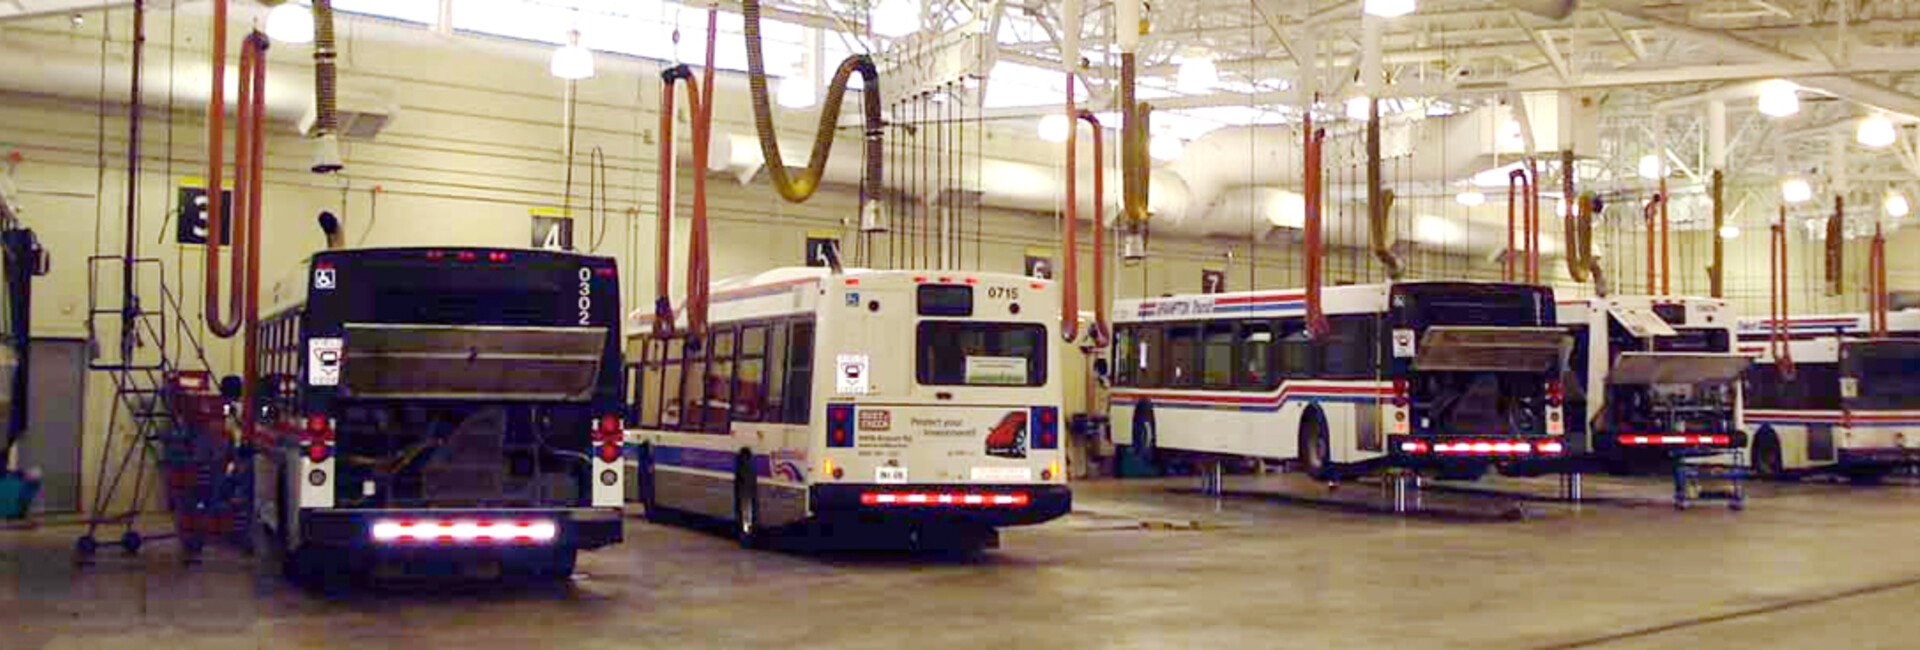 hero-plymovent-exhaust-extraction-system-in-bus-facility.jpg